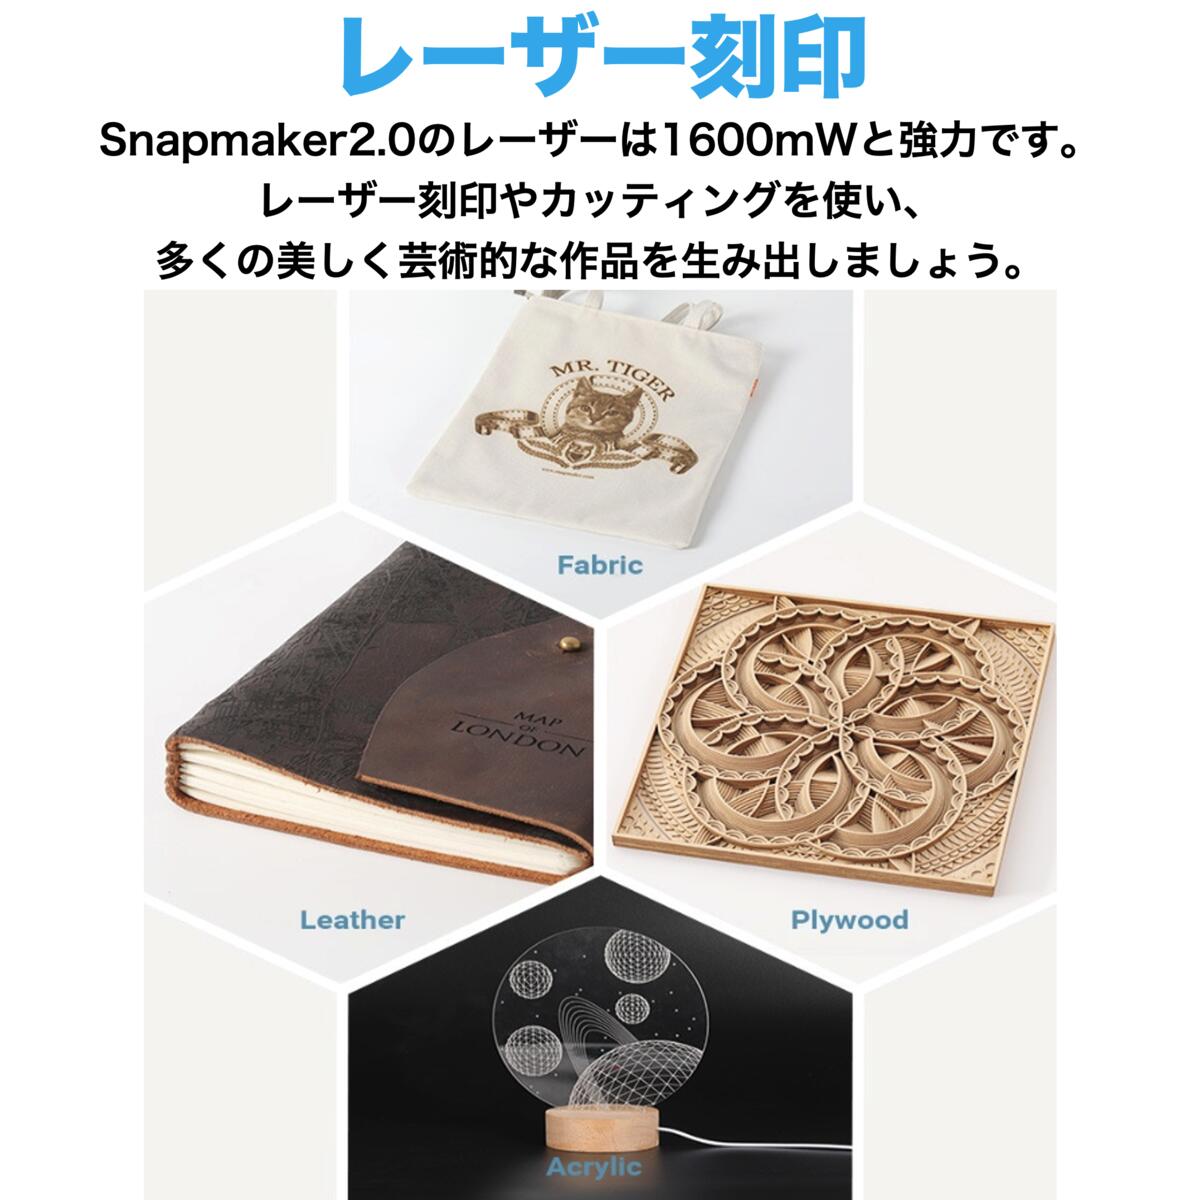 Snapmaker A250T 3in1 3Dプリンター レーザーカット CNC彫刻 3D